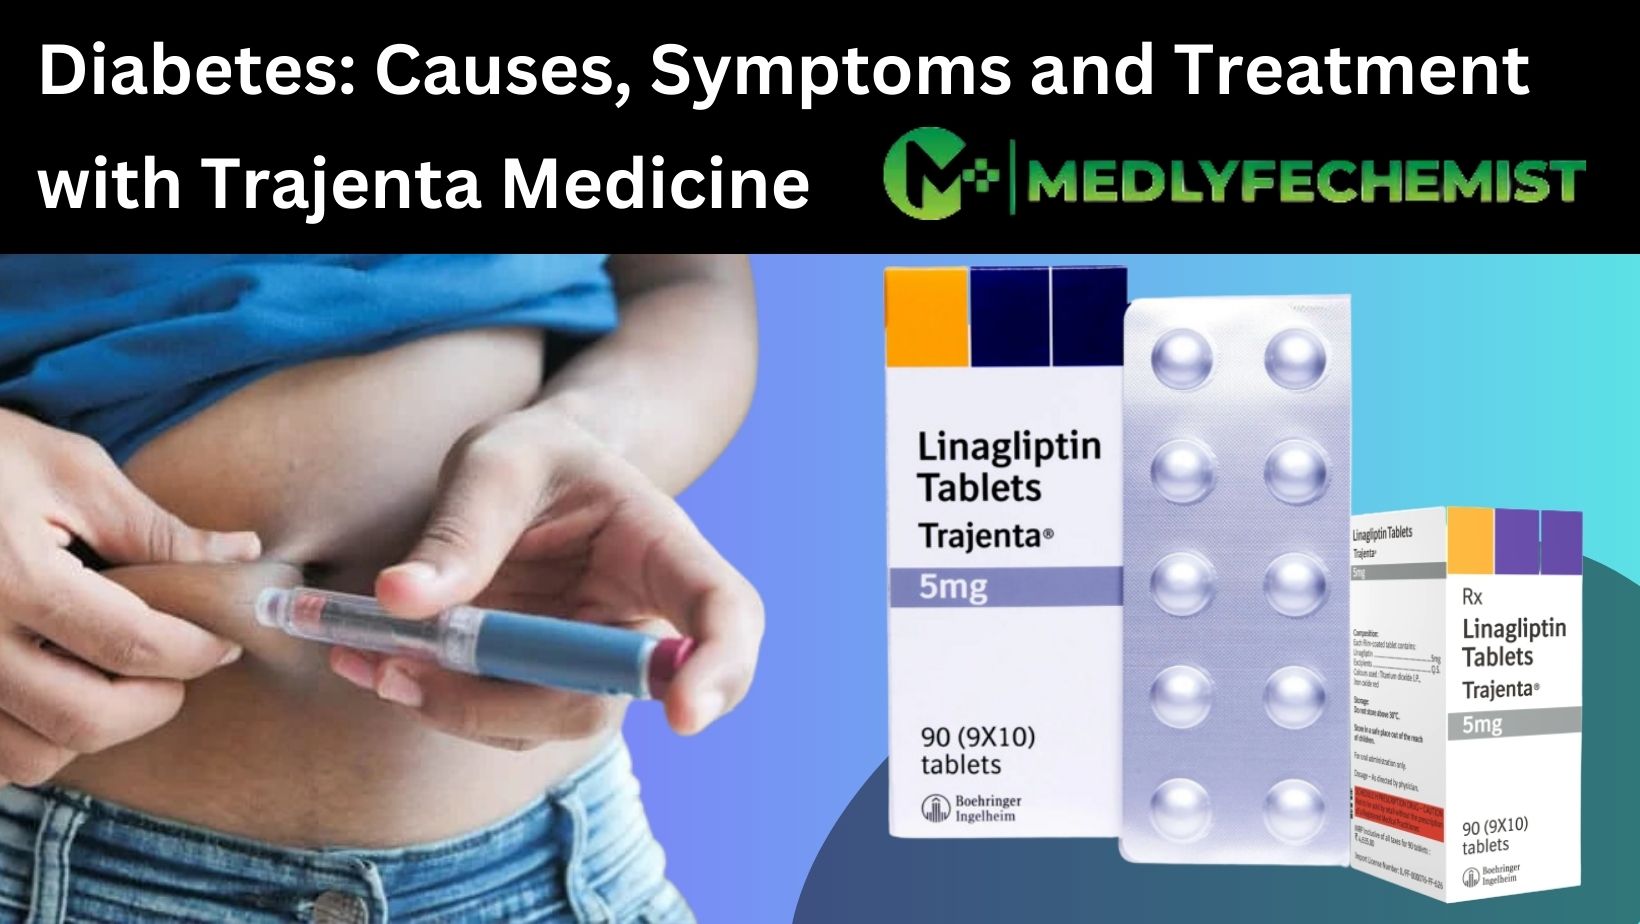 Diabetes Causes, Symptoms and Treatment with Trajenta Medicine